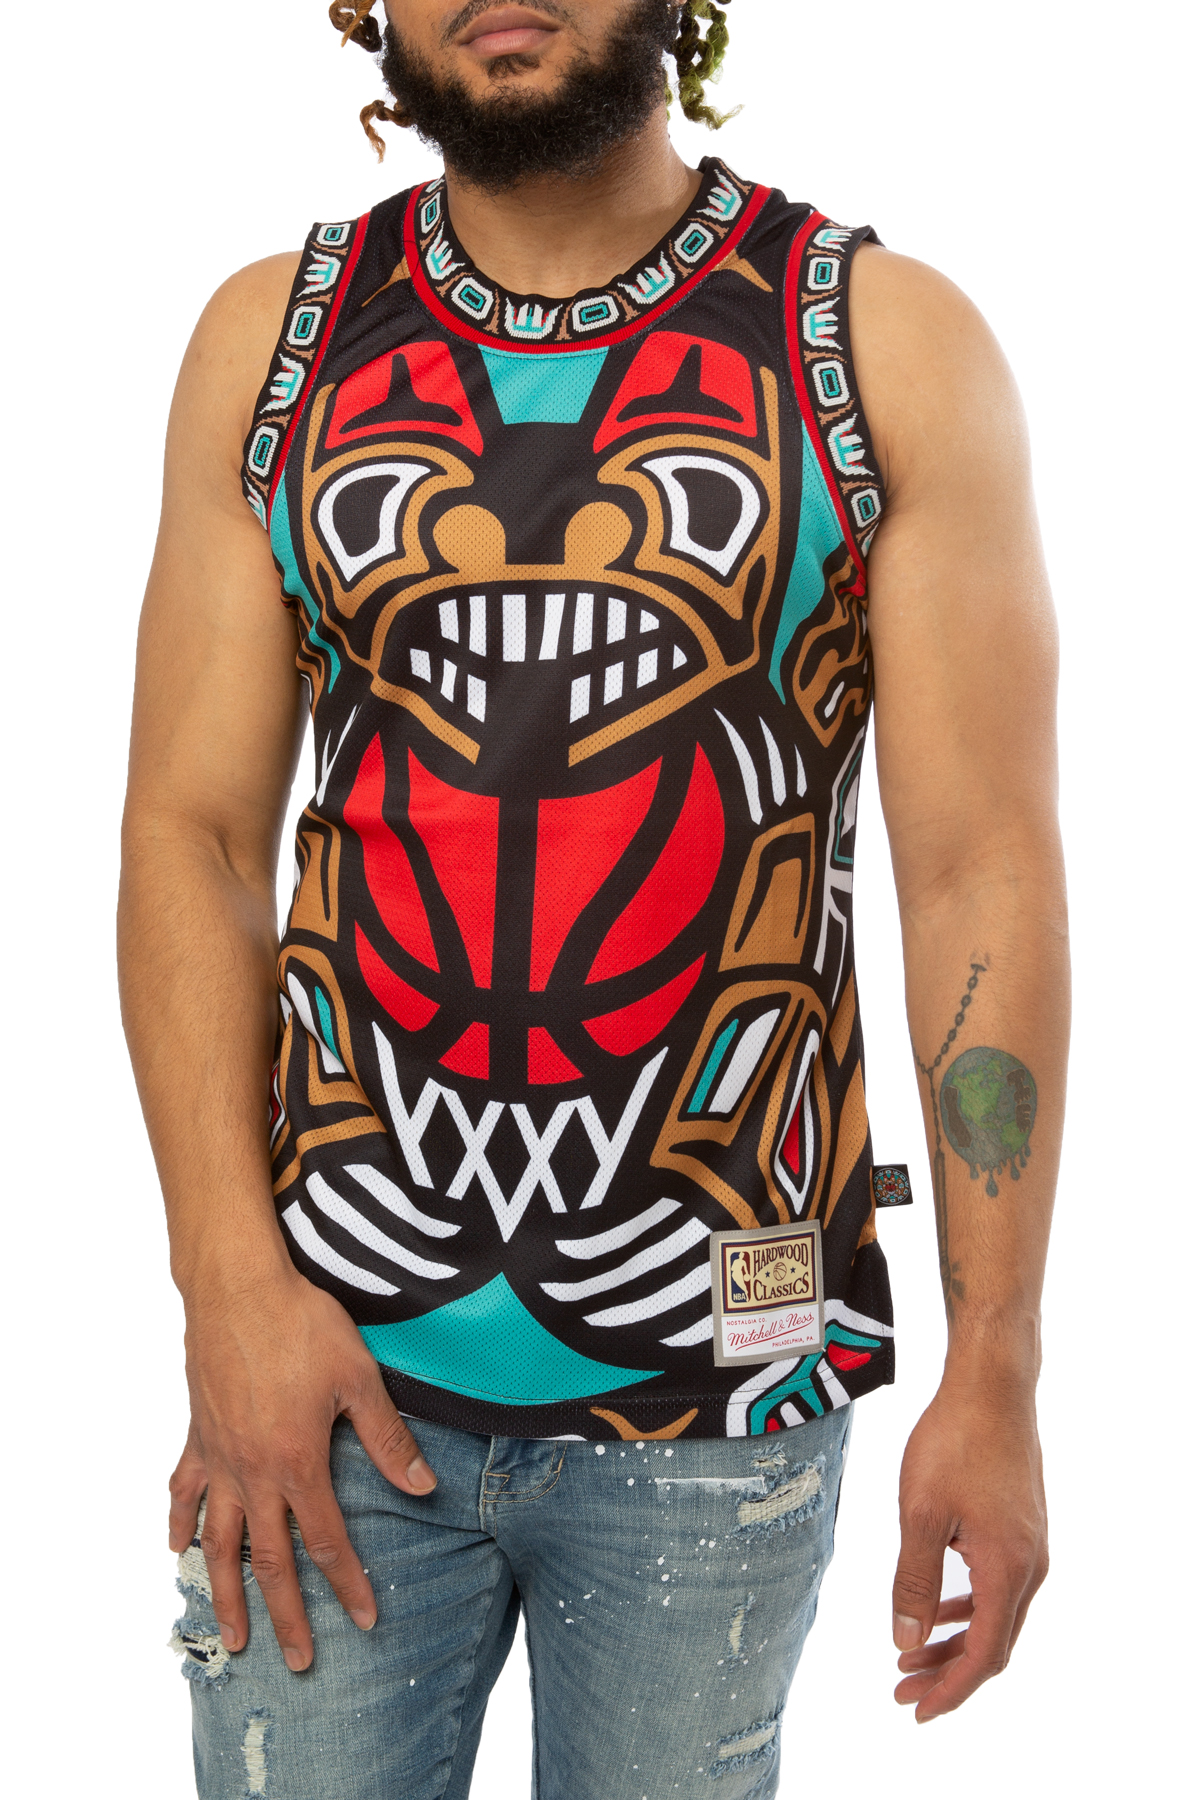 vancouver grizzlies red jersey